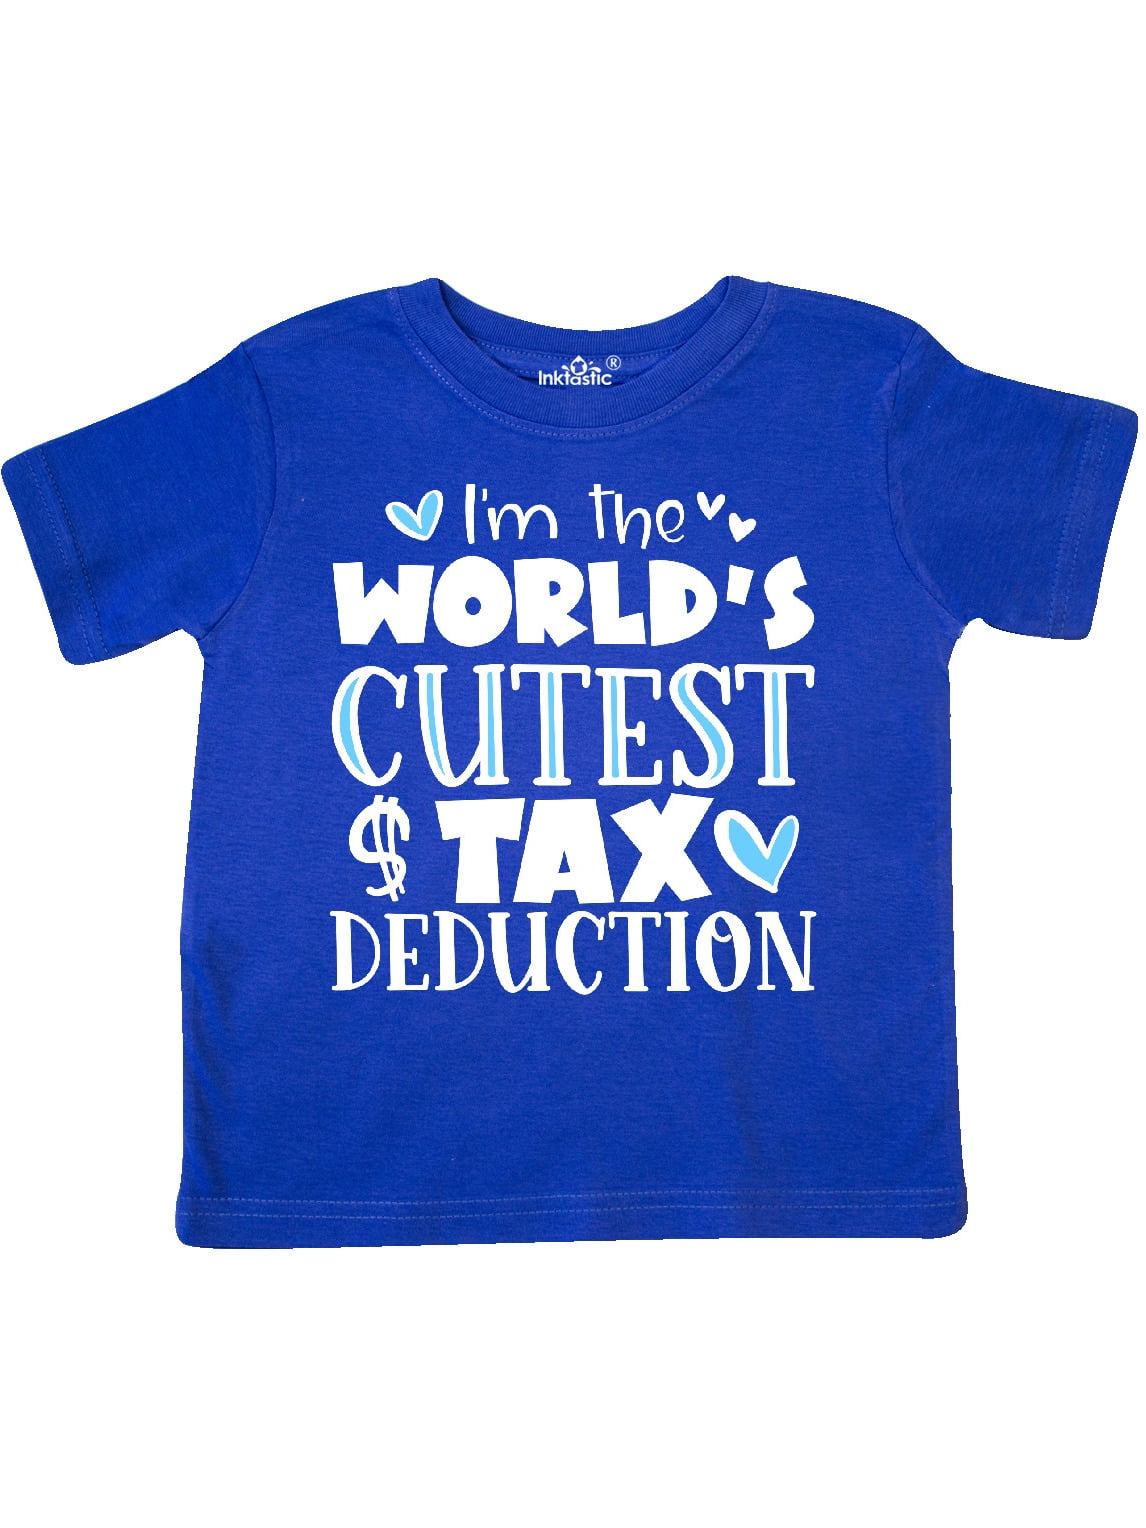 Worlds Cutest Tax Deduction Cute Novelty Funny Youth & Toddler Long Sleeve Tee Shirt 